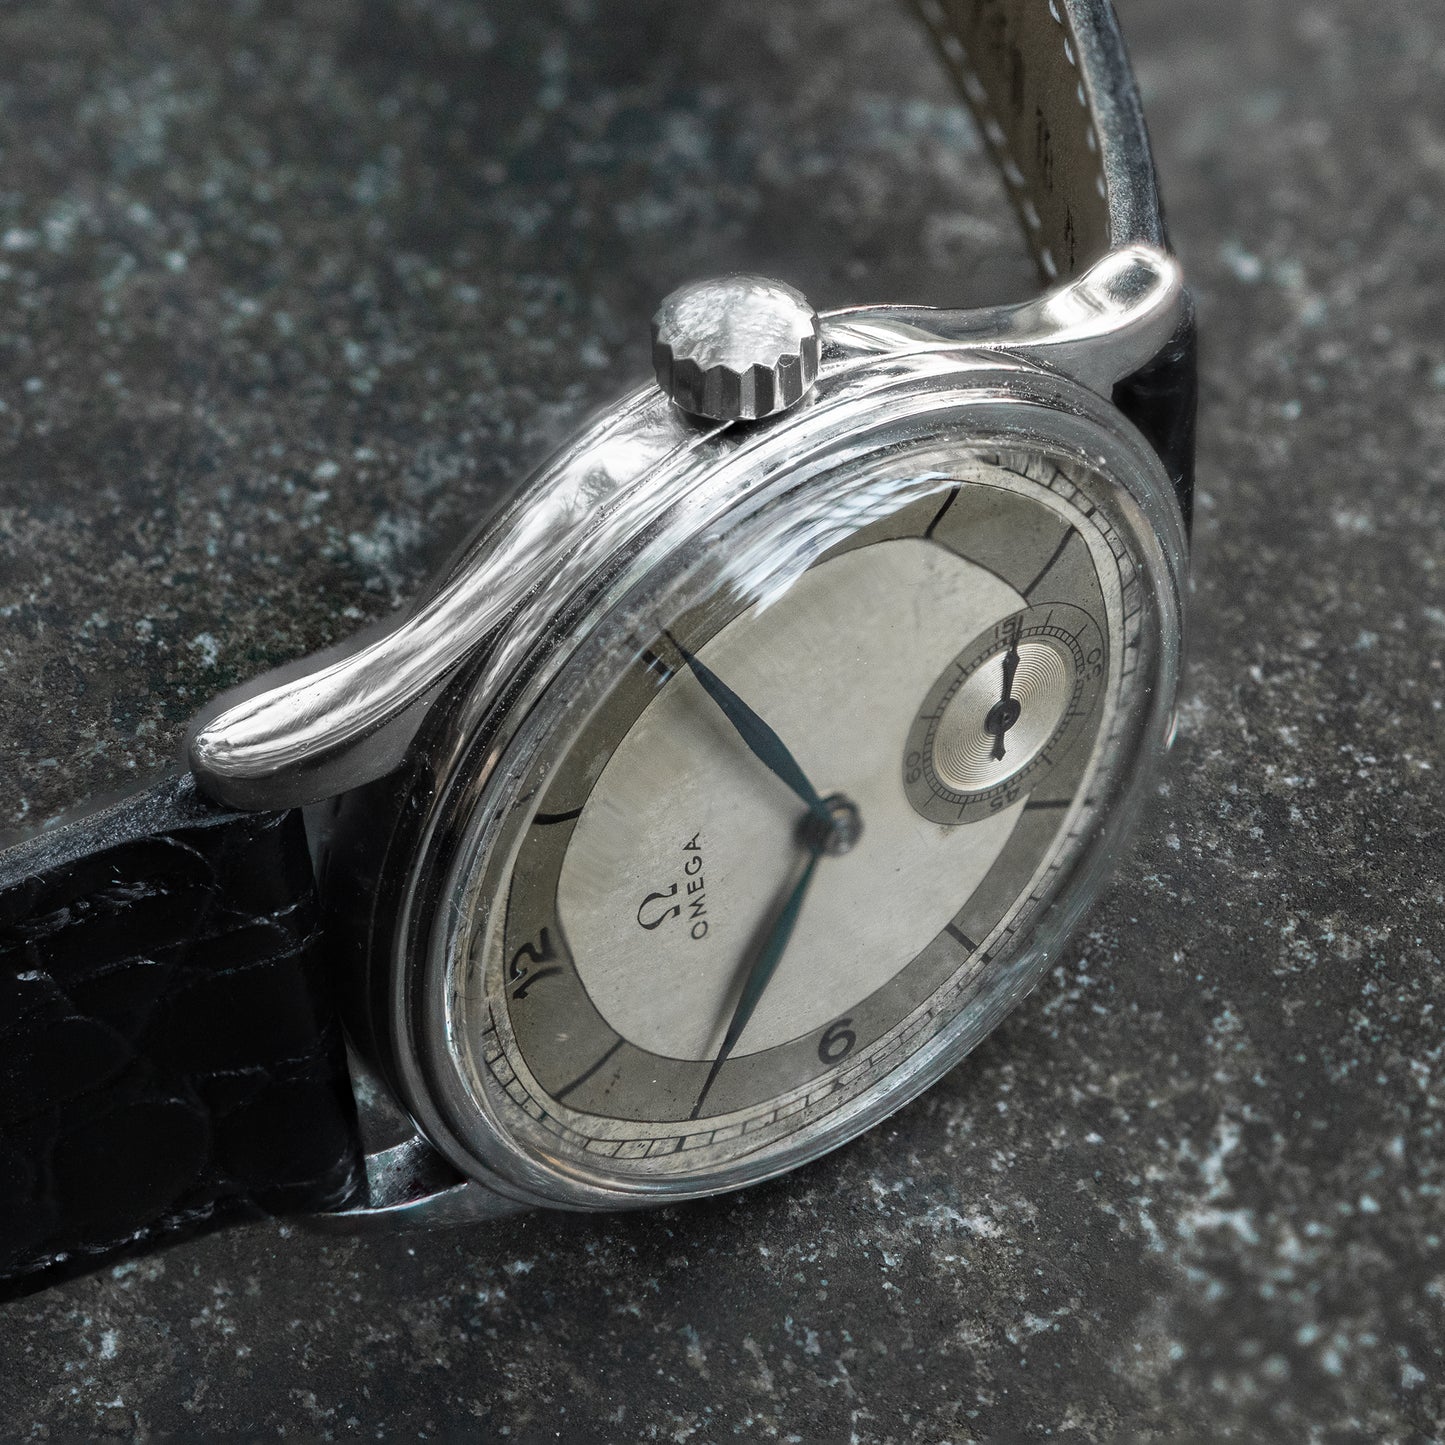 No. 327 / Omega Sector Dial (Serviced) - 1935